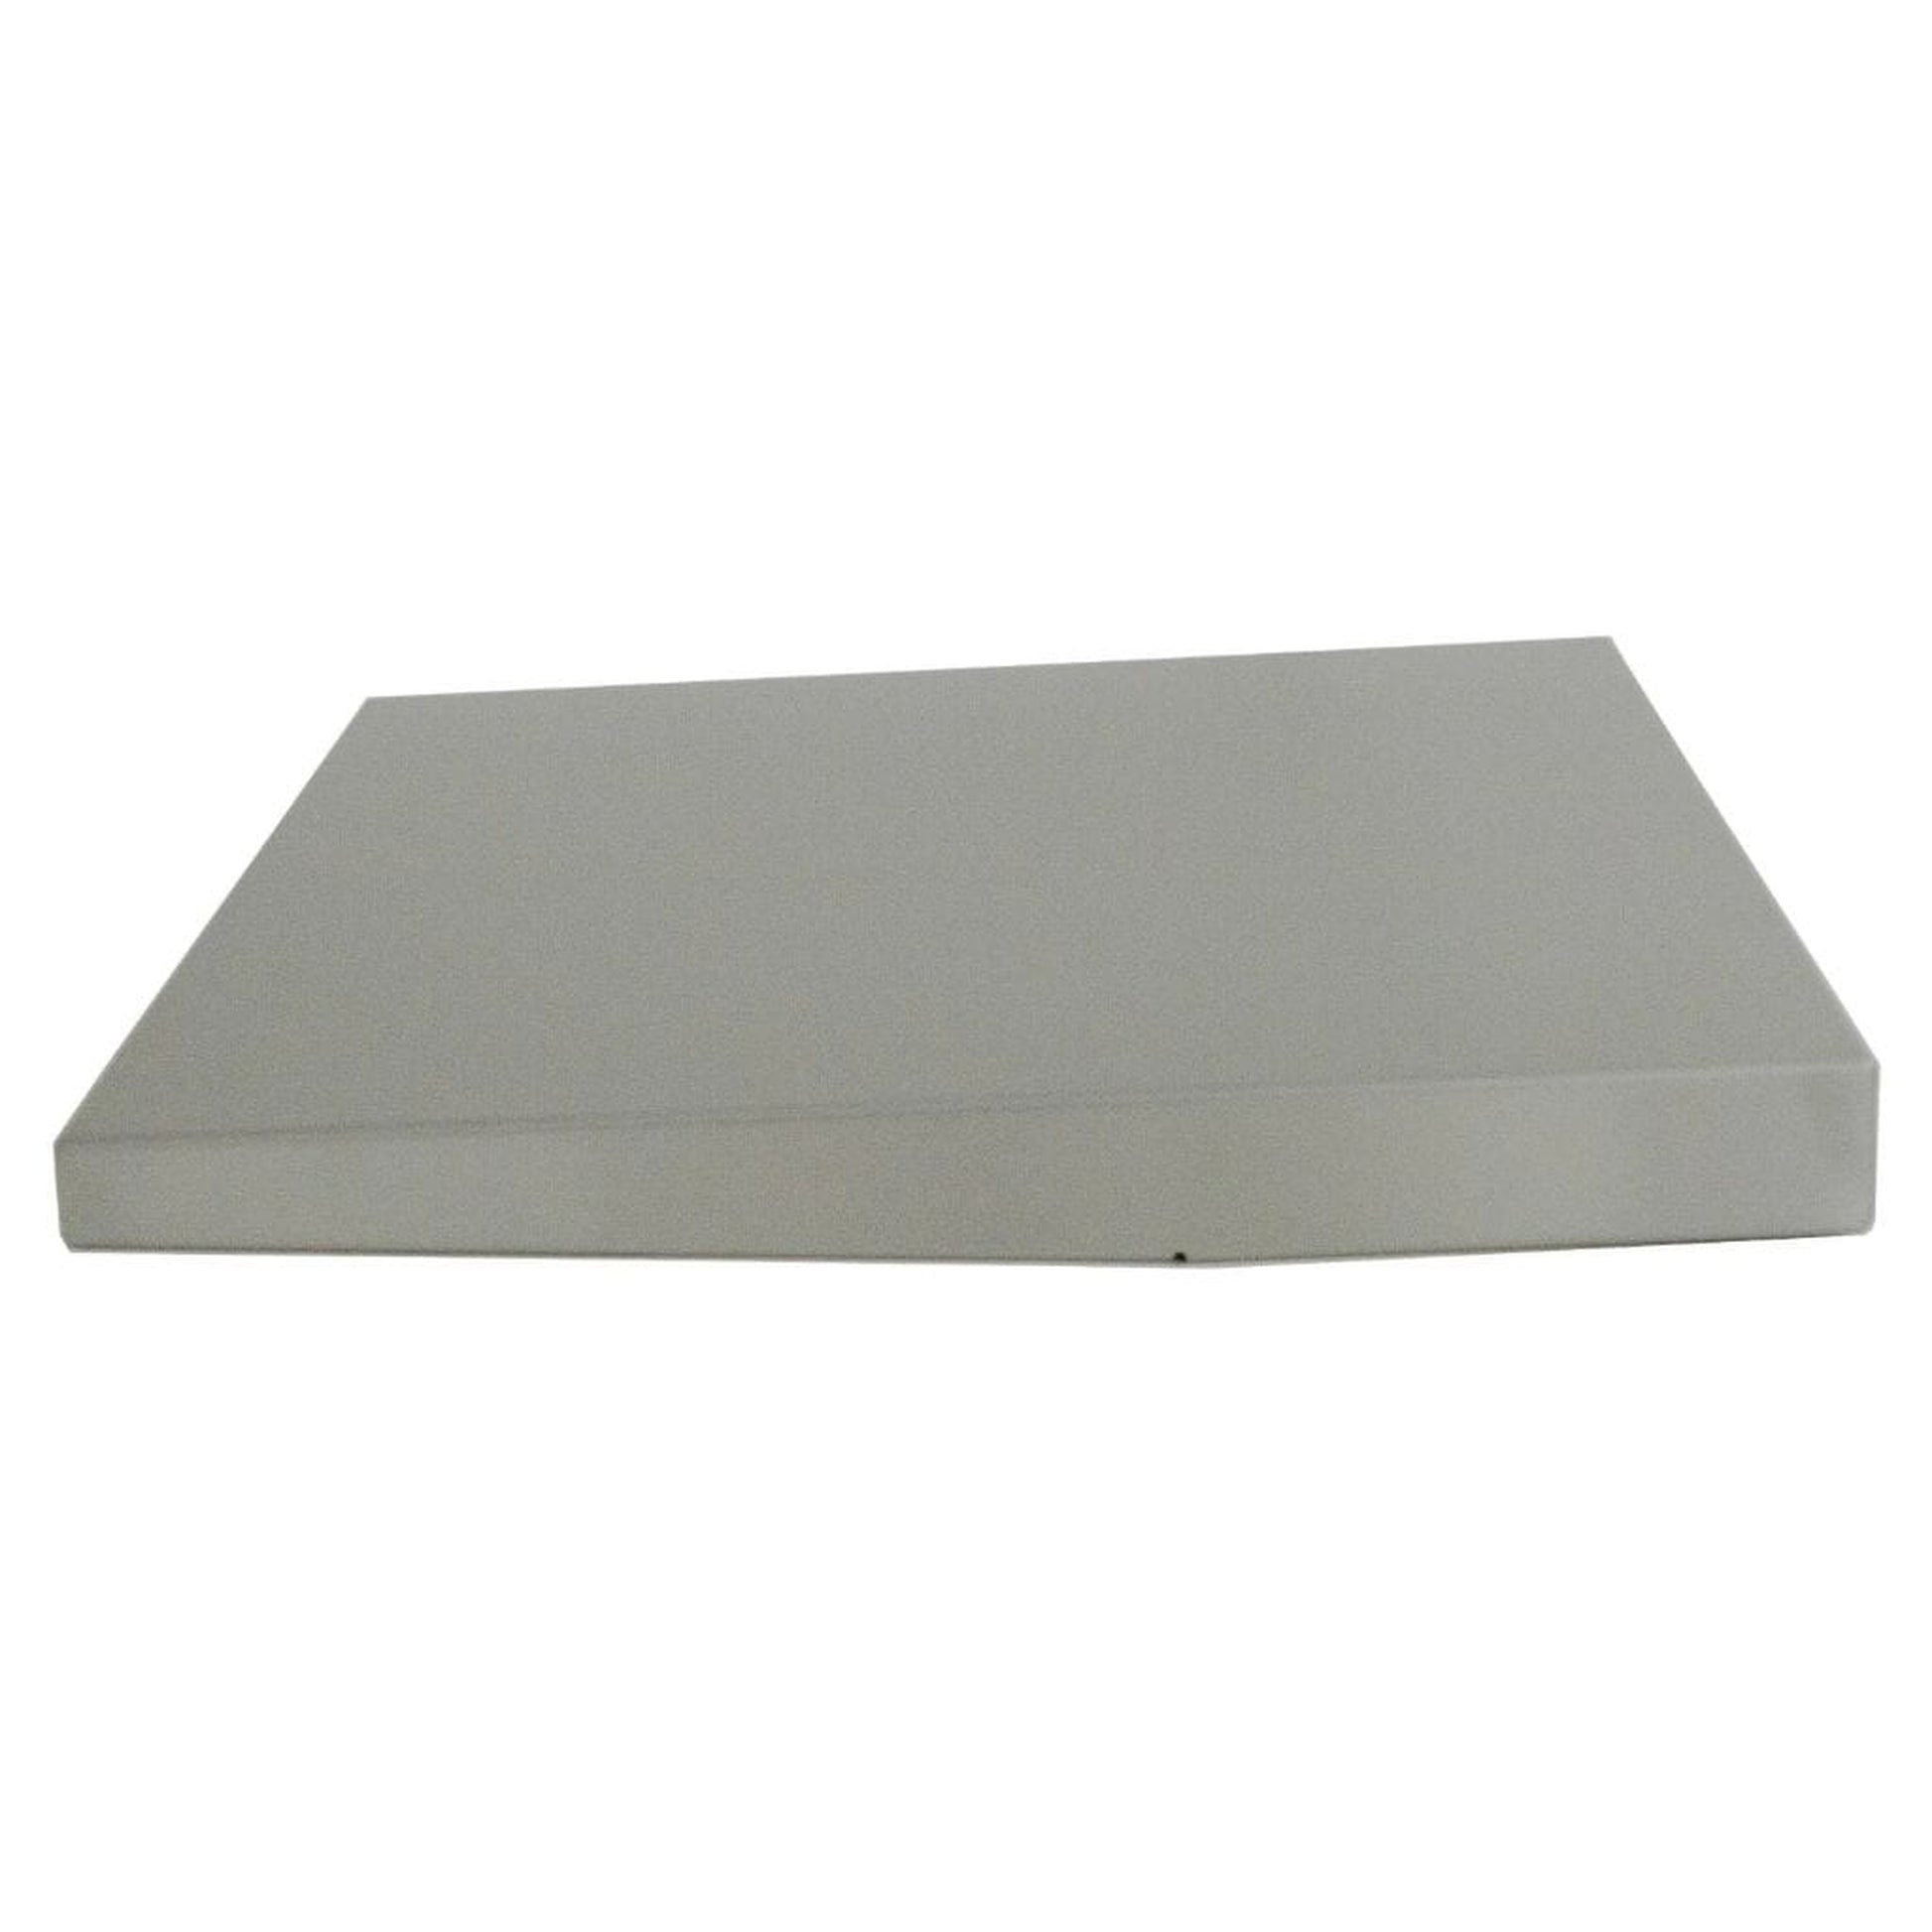 Blaze Side Shelves for the 10"/17" Pedestal for the Professional LUX Portable Grill